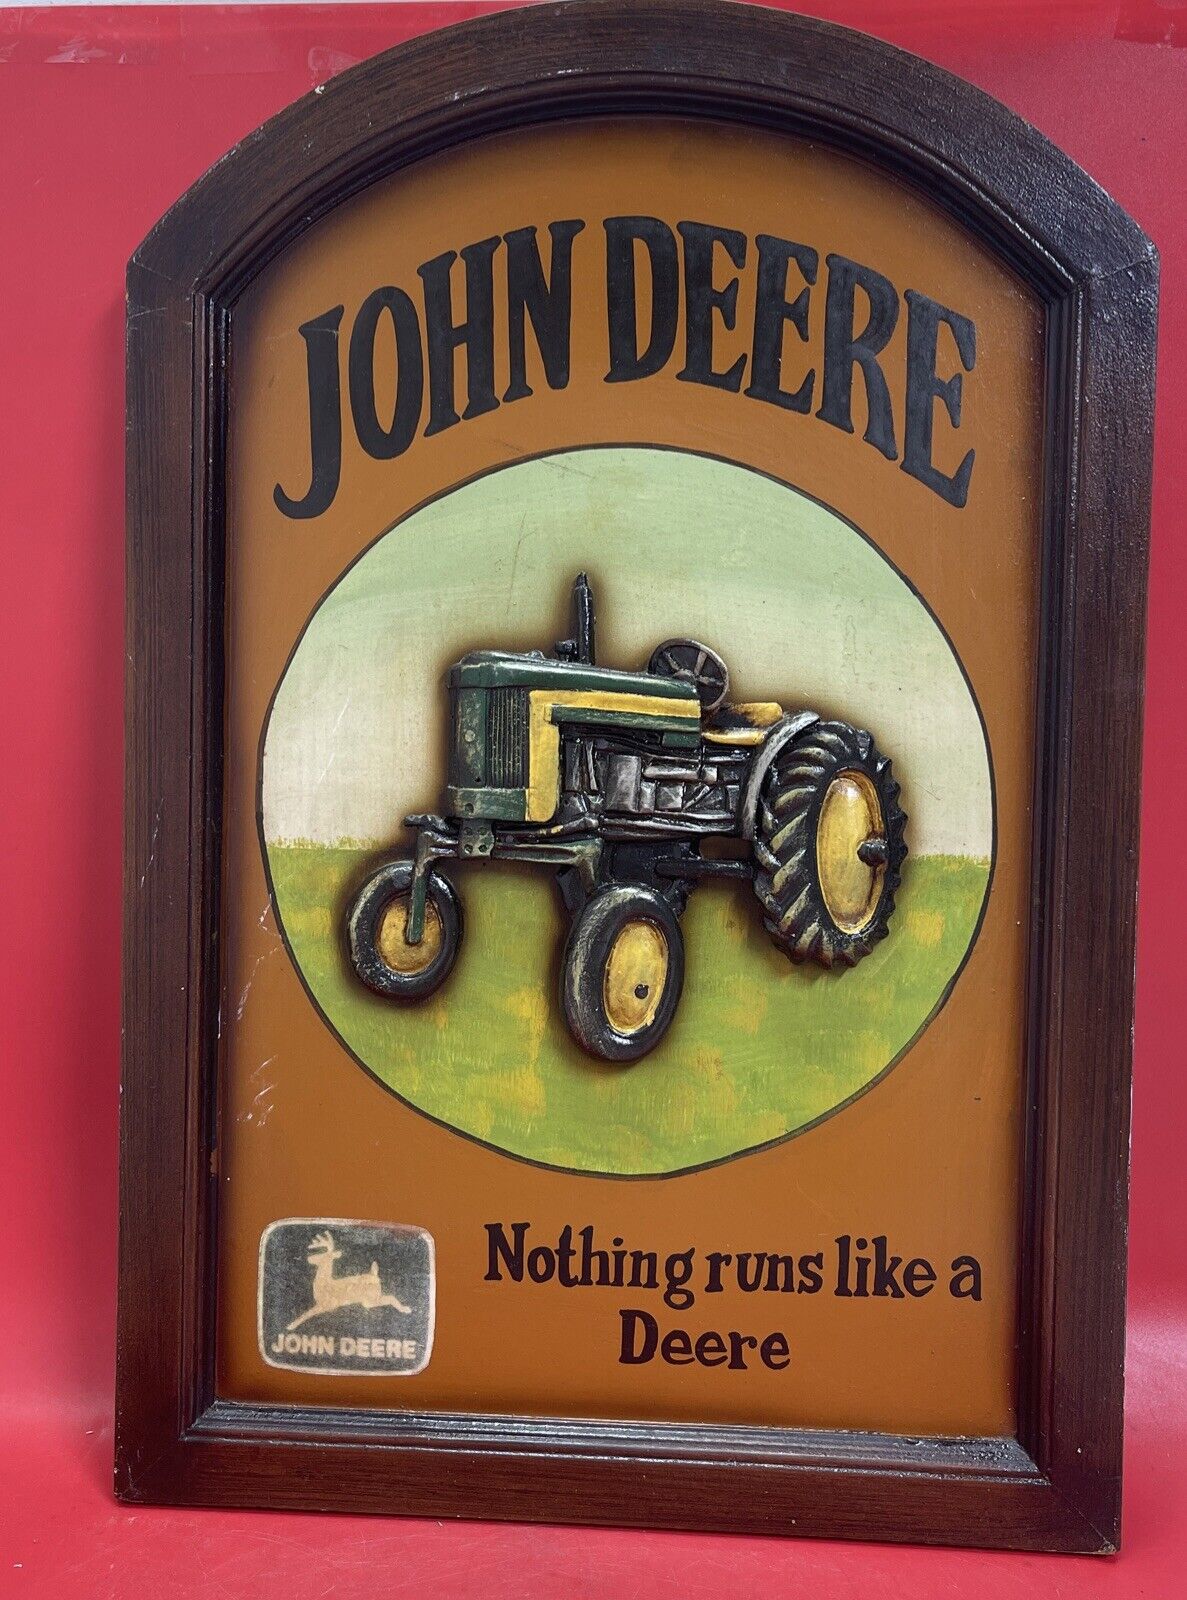 John Deere Moline Vintage Style Embossed Wood Sign for Farm Tractor 24”x 16”